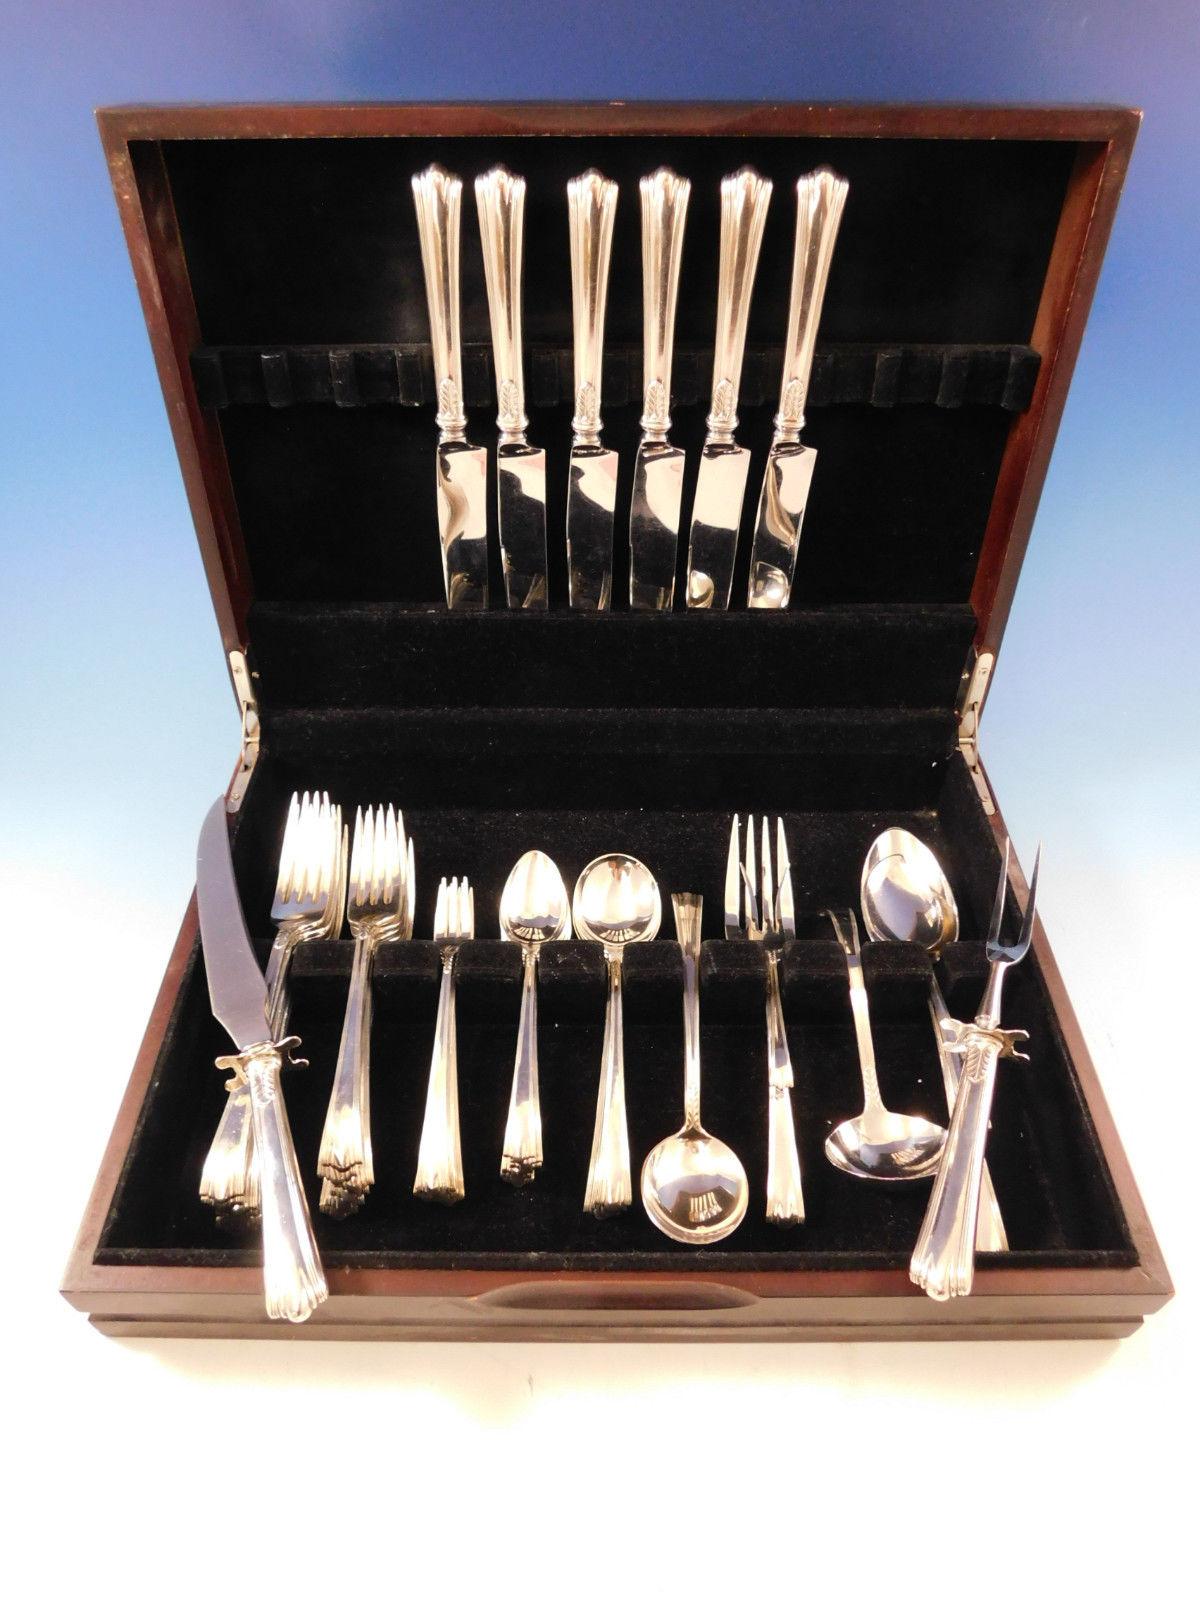 Dinner size American Directoire by Lunt, circa 1931, sterling silver flatware set, 43 pieces. Great starter set! This set includes:

6 dinner size knives, 9 5/8